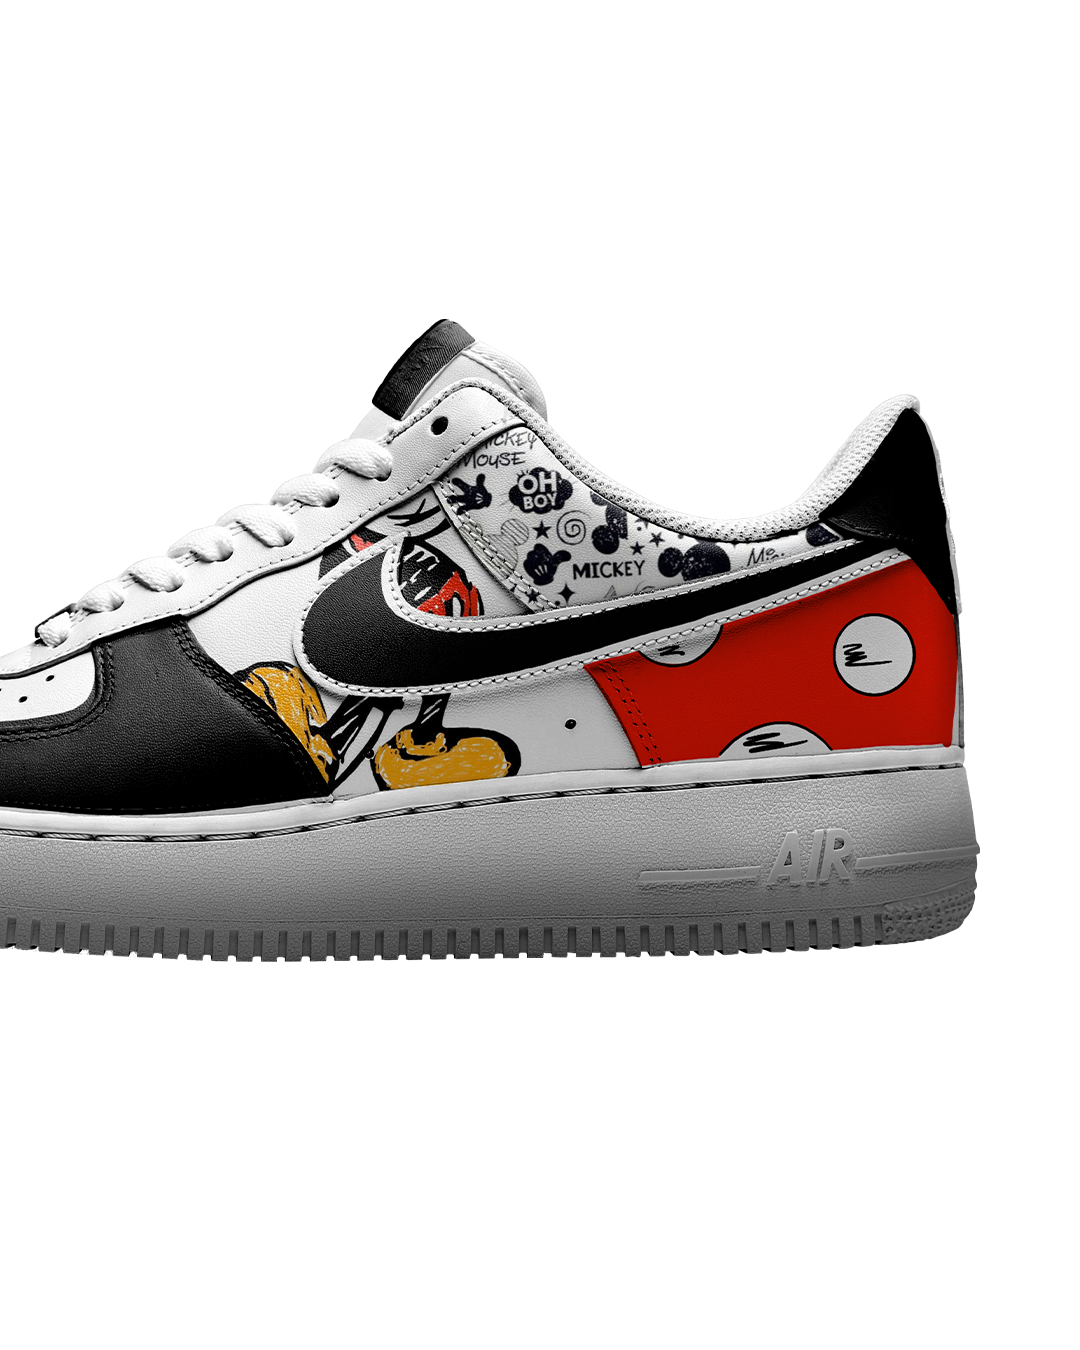 Nike Air Force 1 'Mickey Mouse'